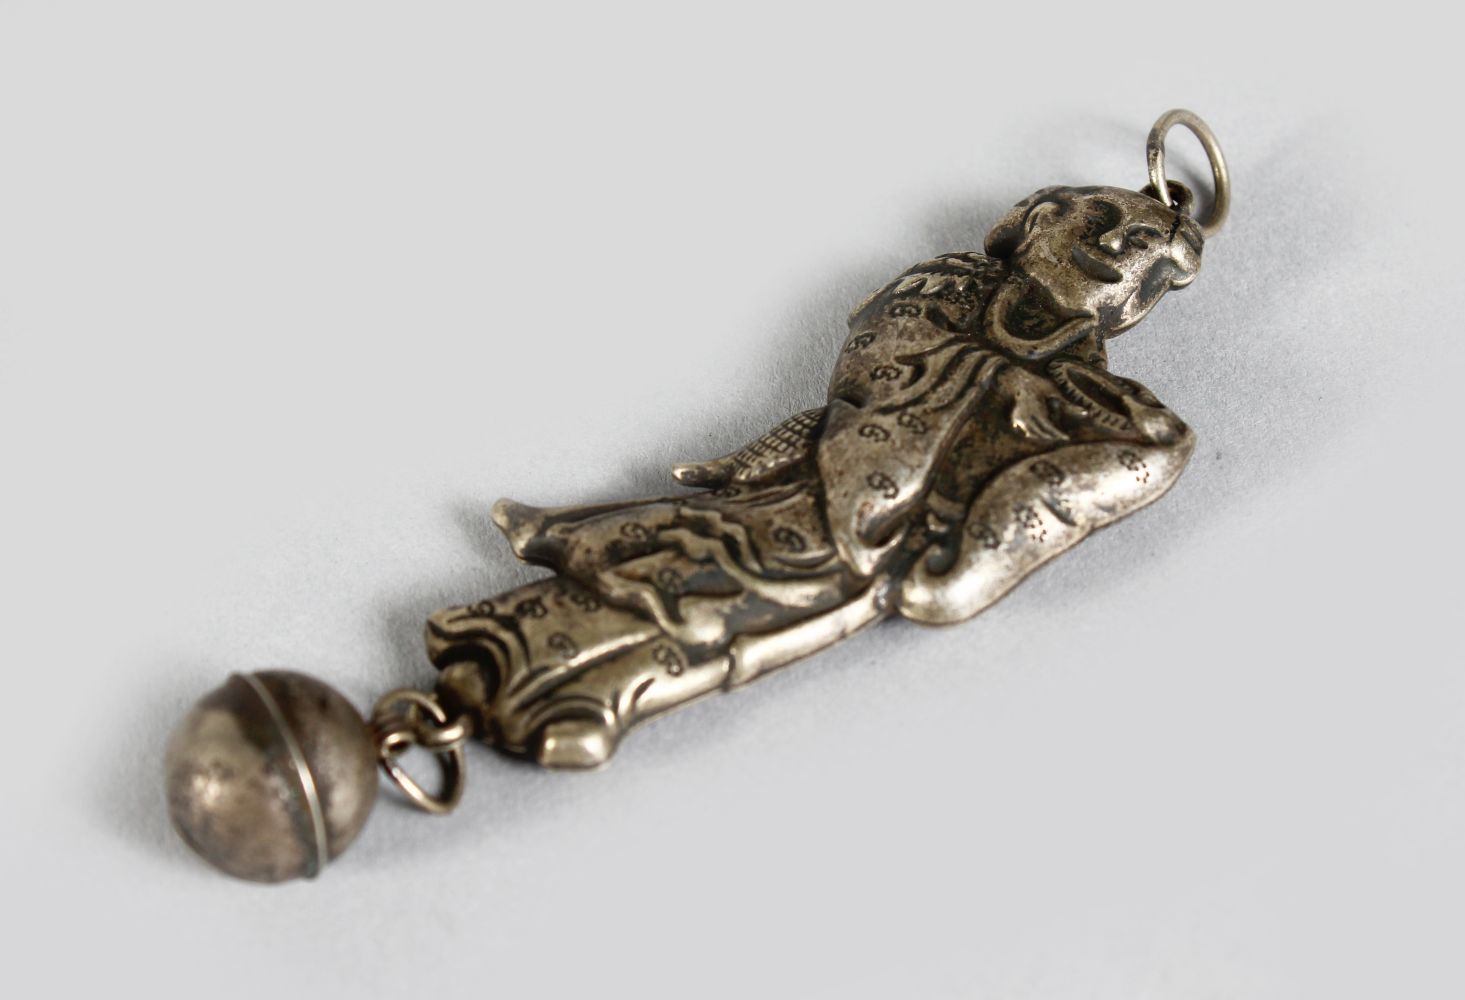 A CHINESE SILVER FIGURE OF A LADY as a rattle.